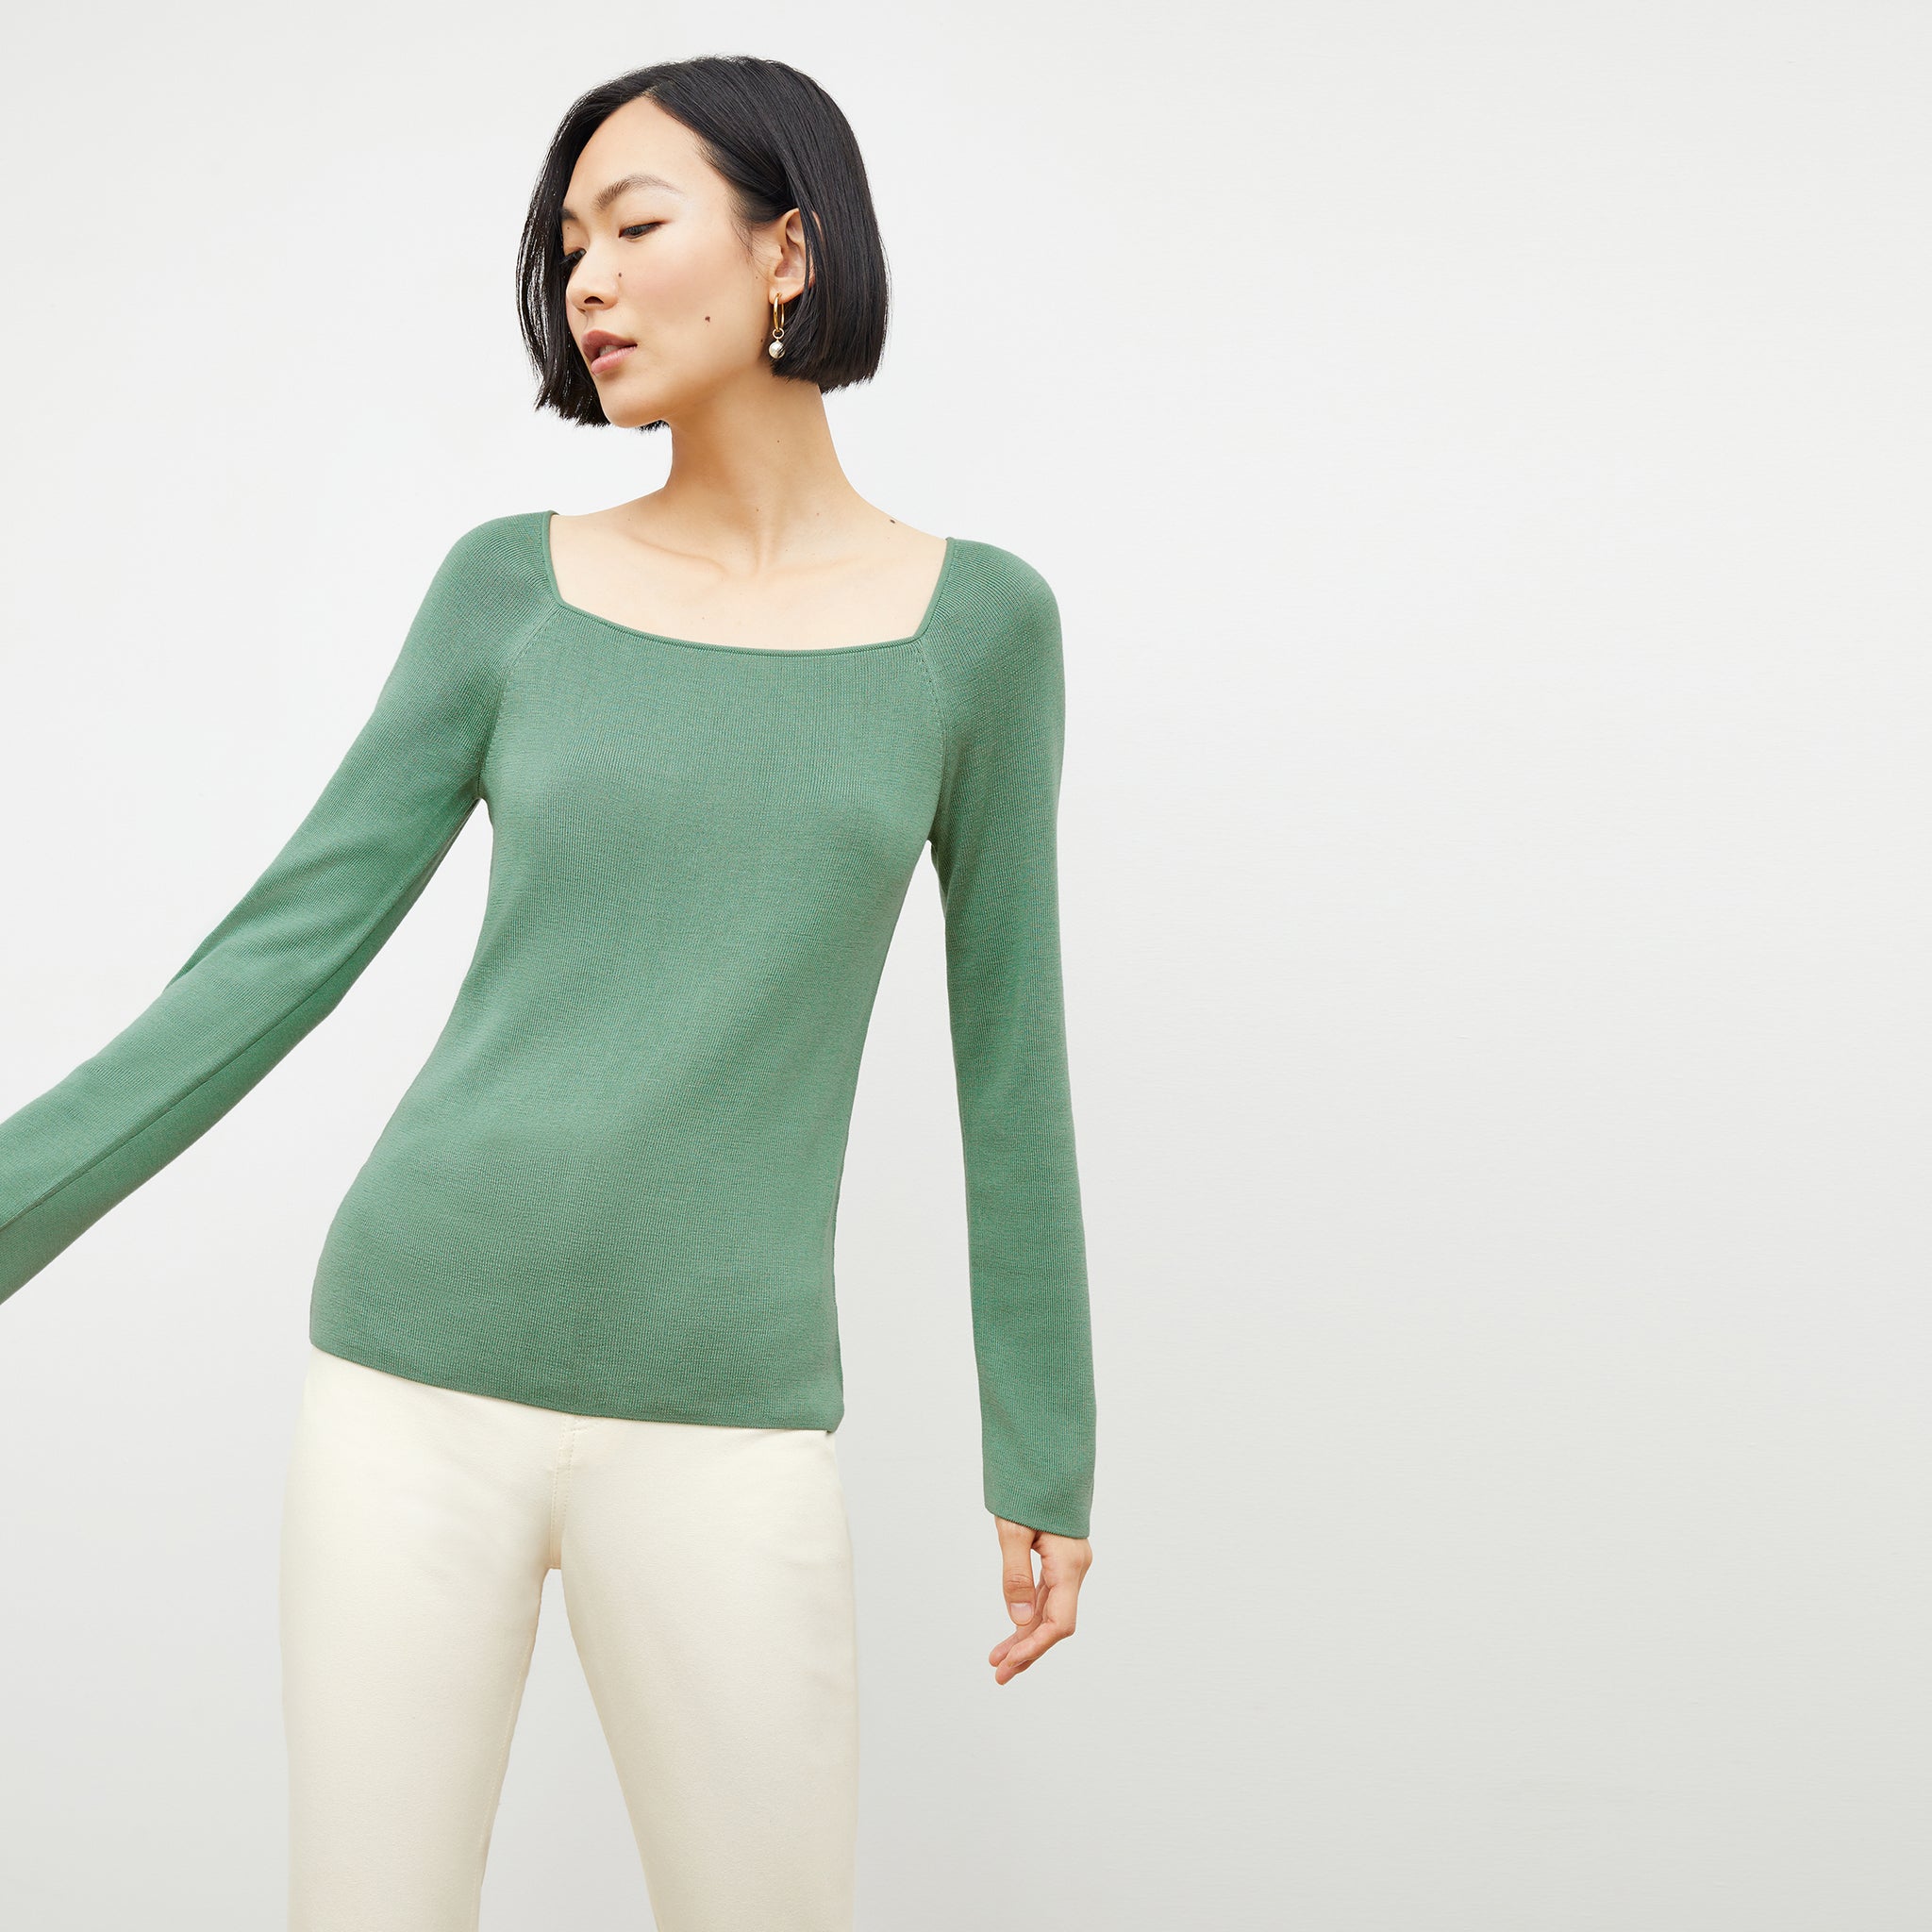 Front image of a woman wearing the joya top in spring green